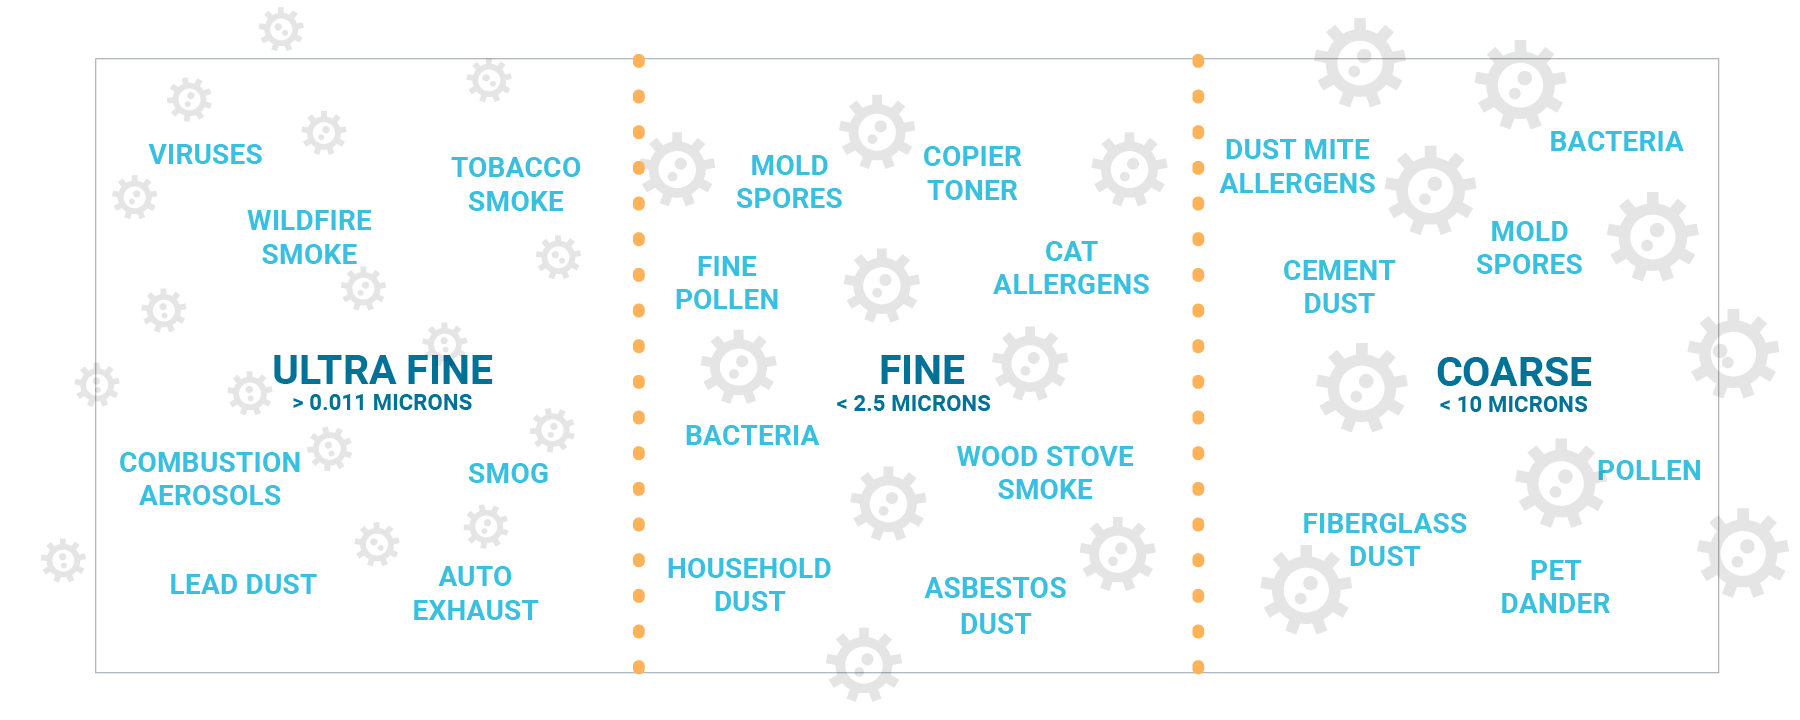 Brio room air purifier removes damaging fine and ultrafine particles as small as 0.011 microns